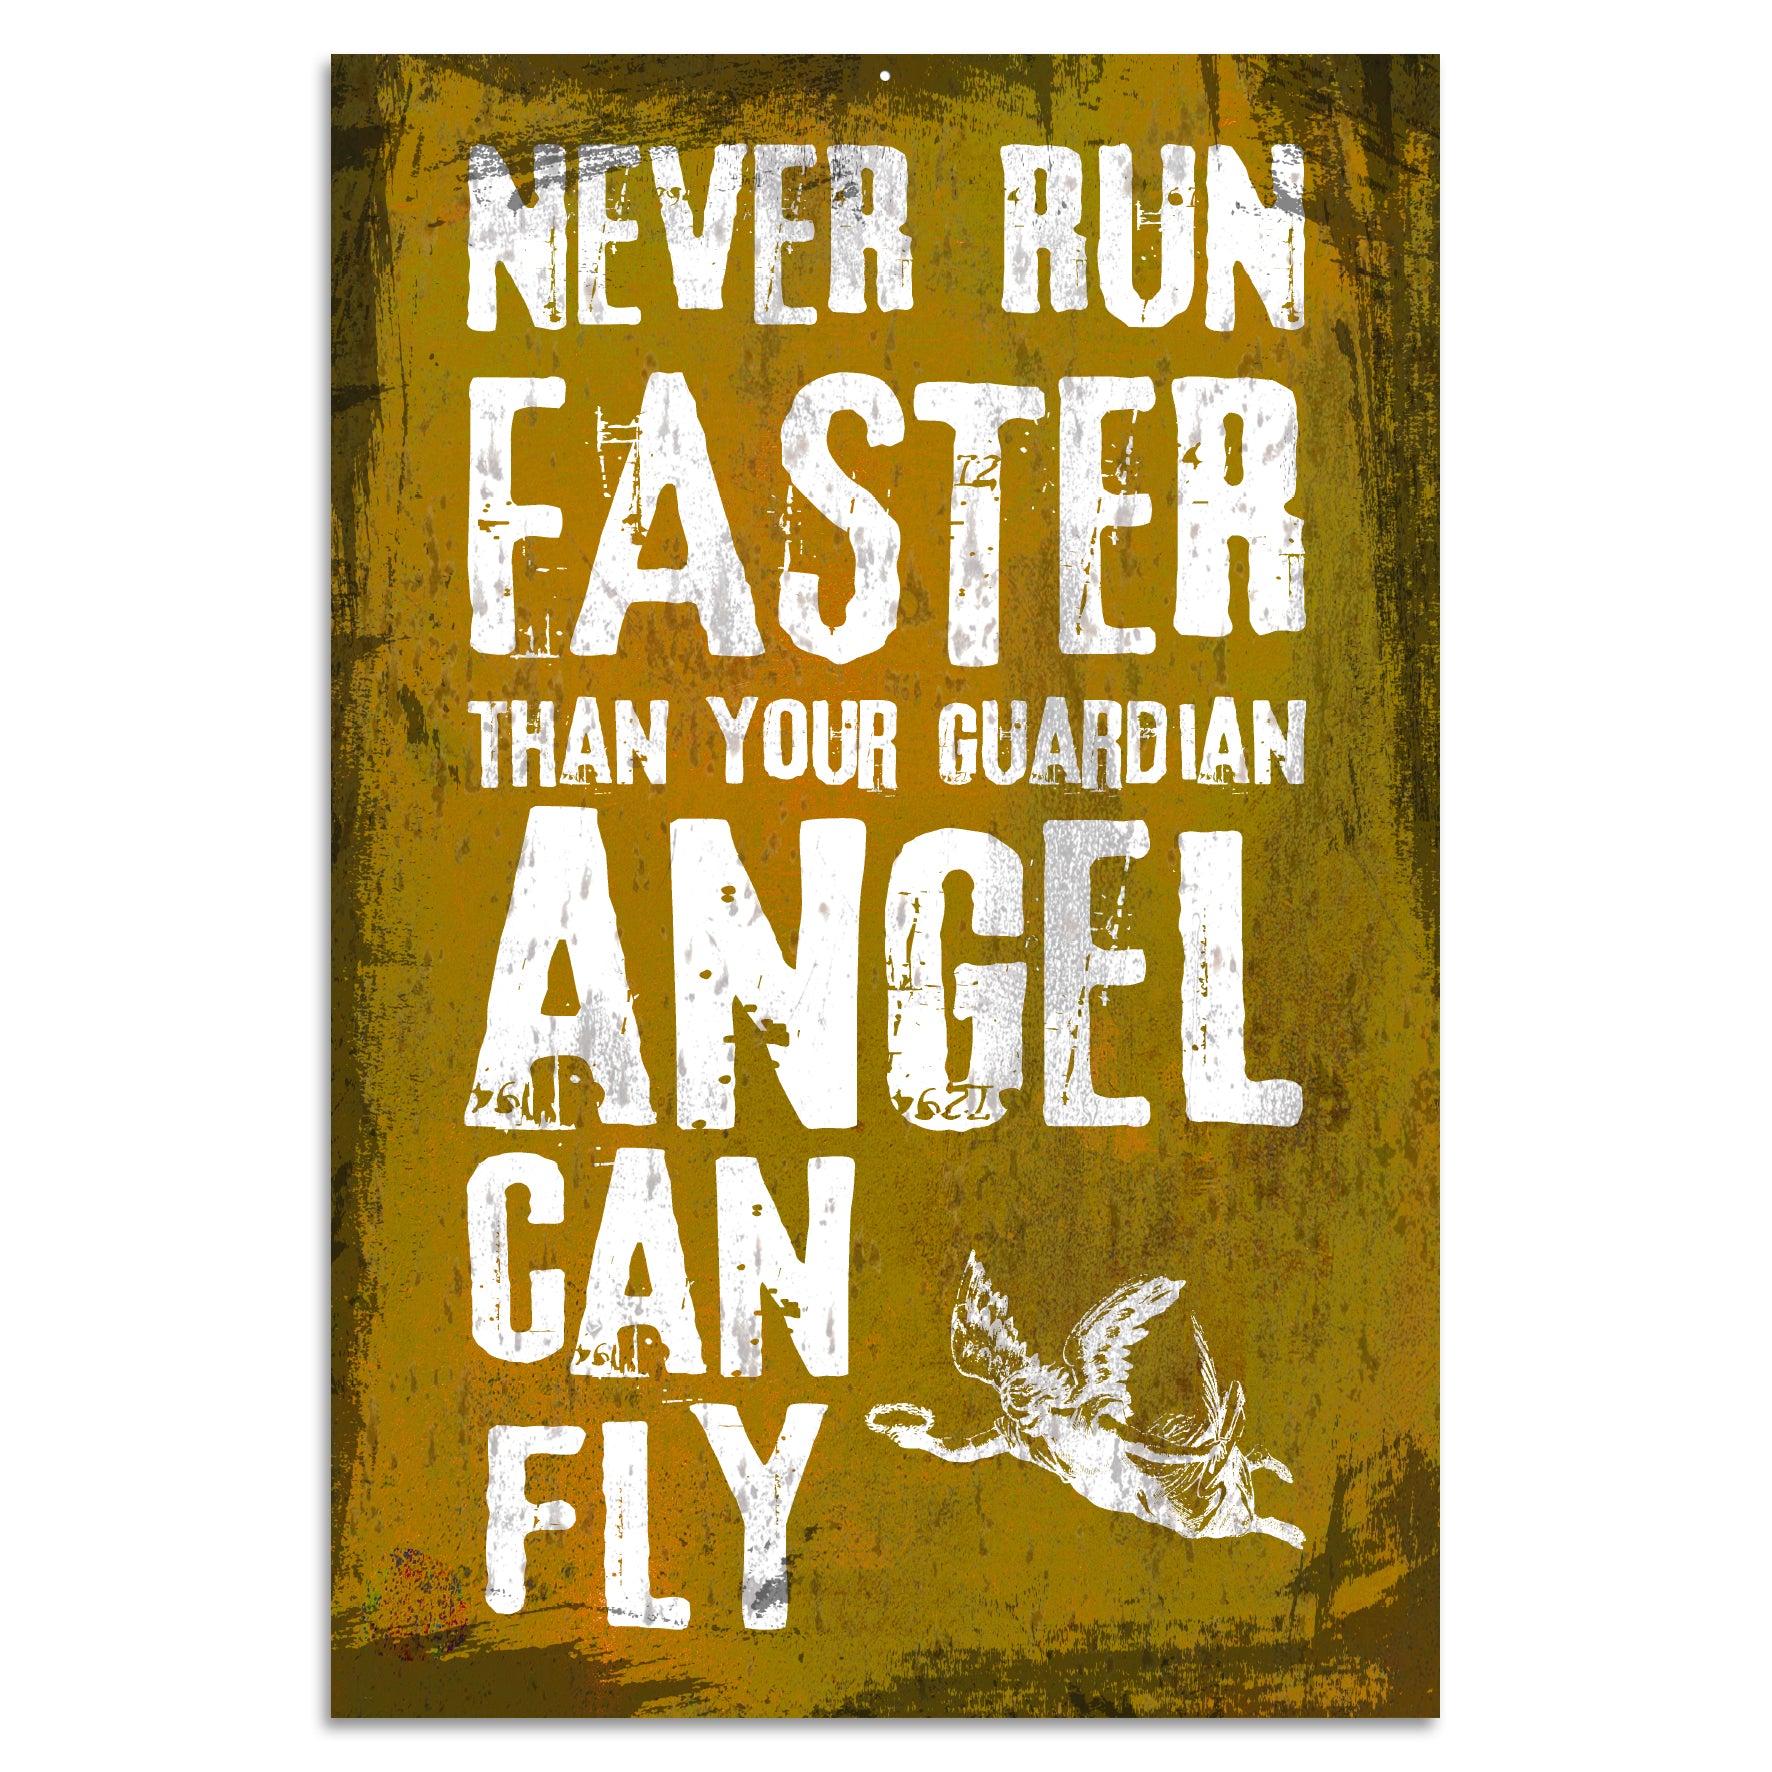 Blechschild - Never Run Faster Than Your Guardian Angel Can Fly